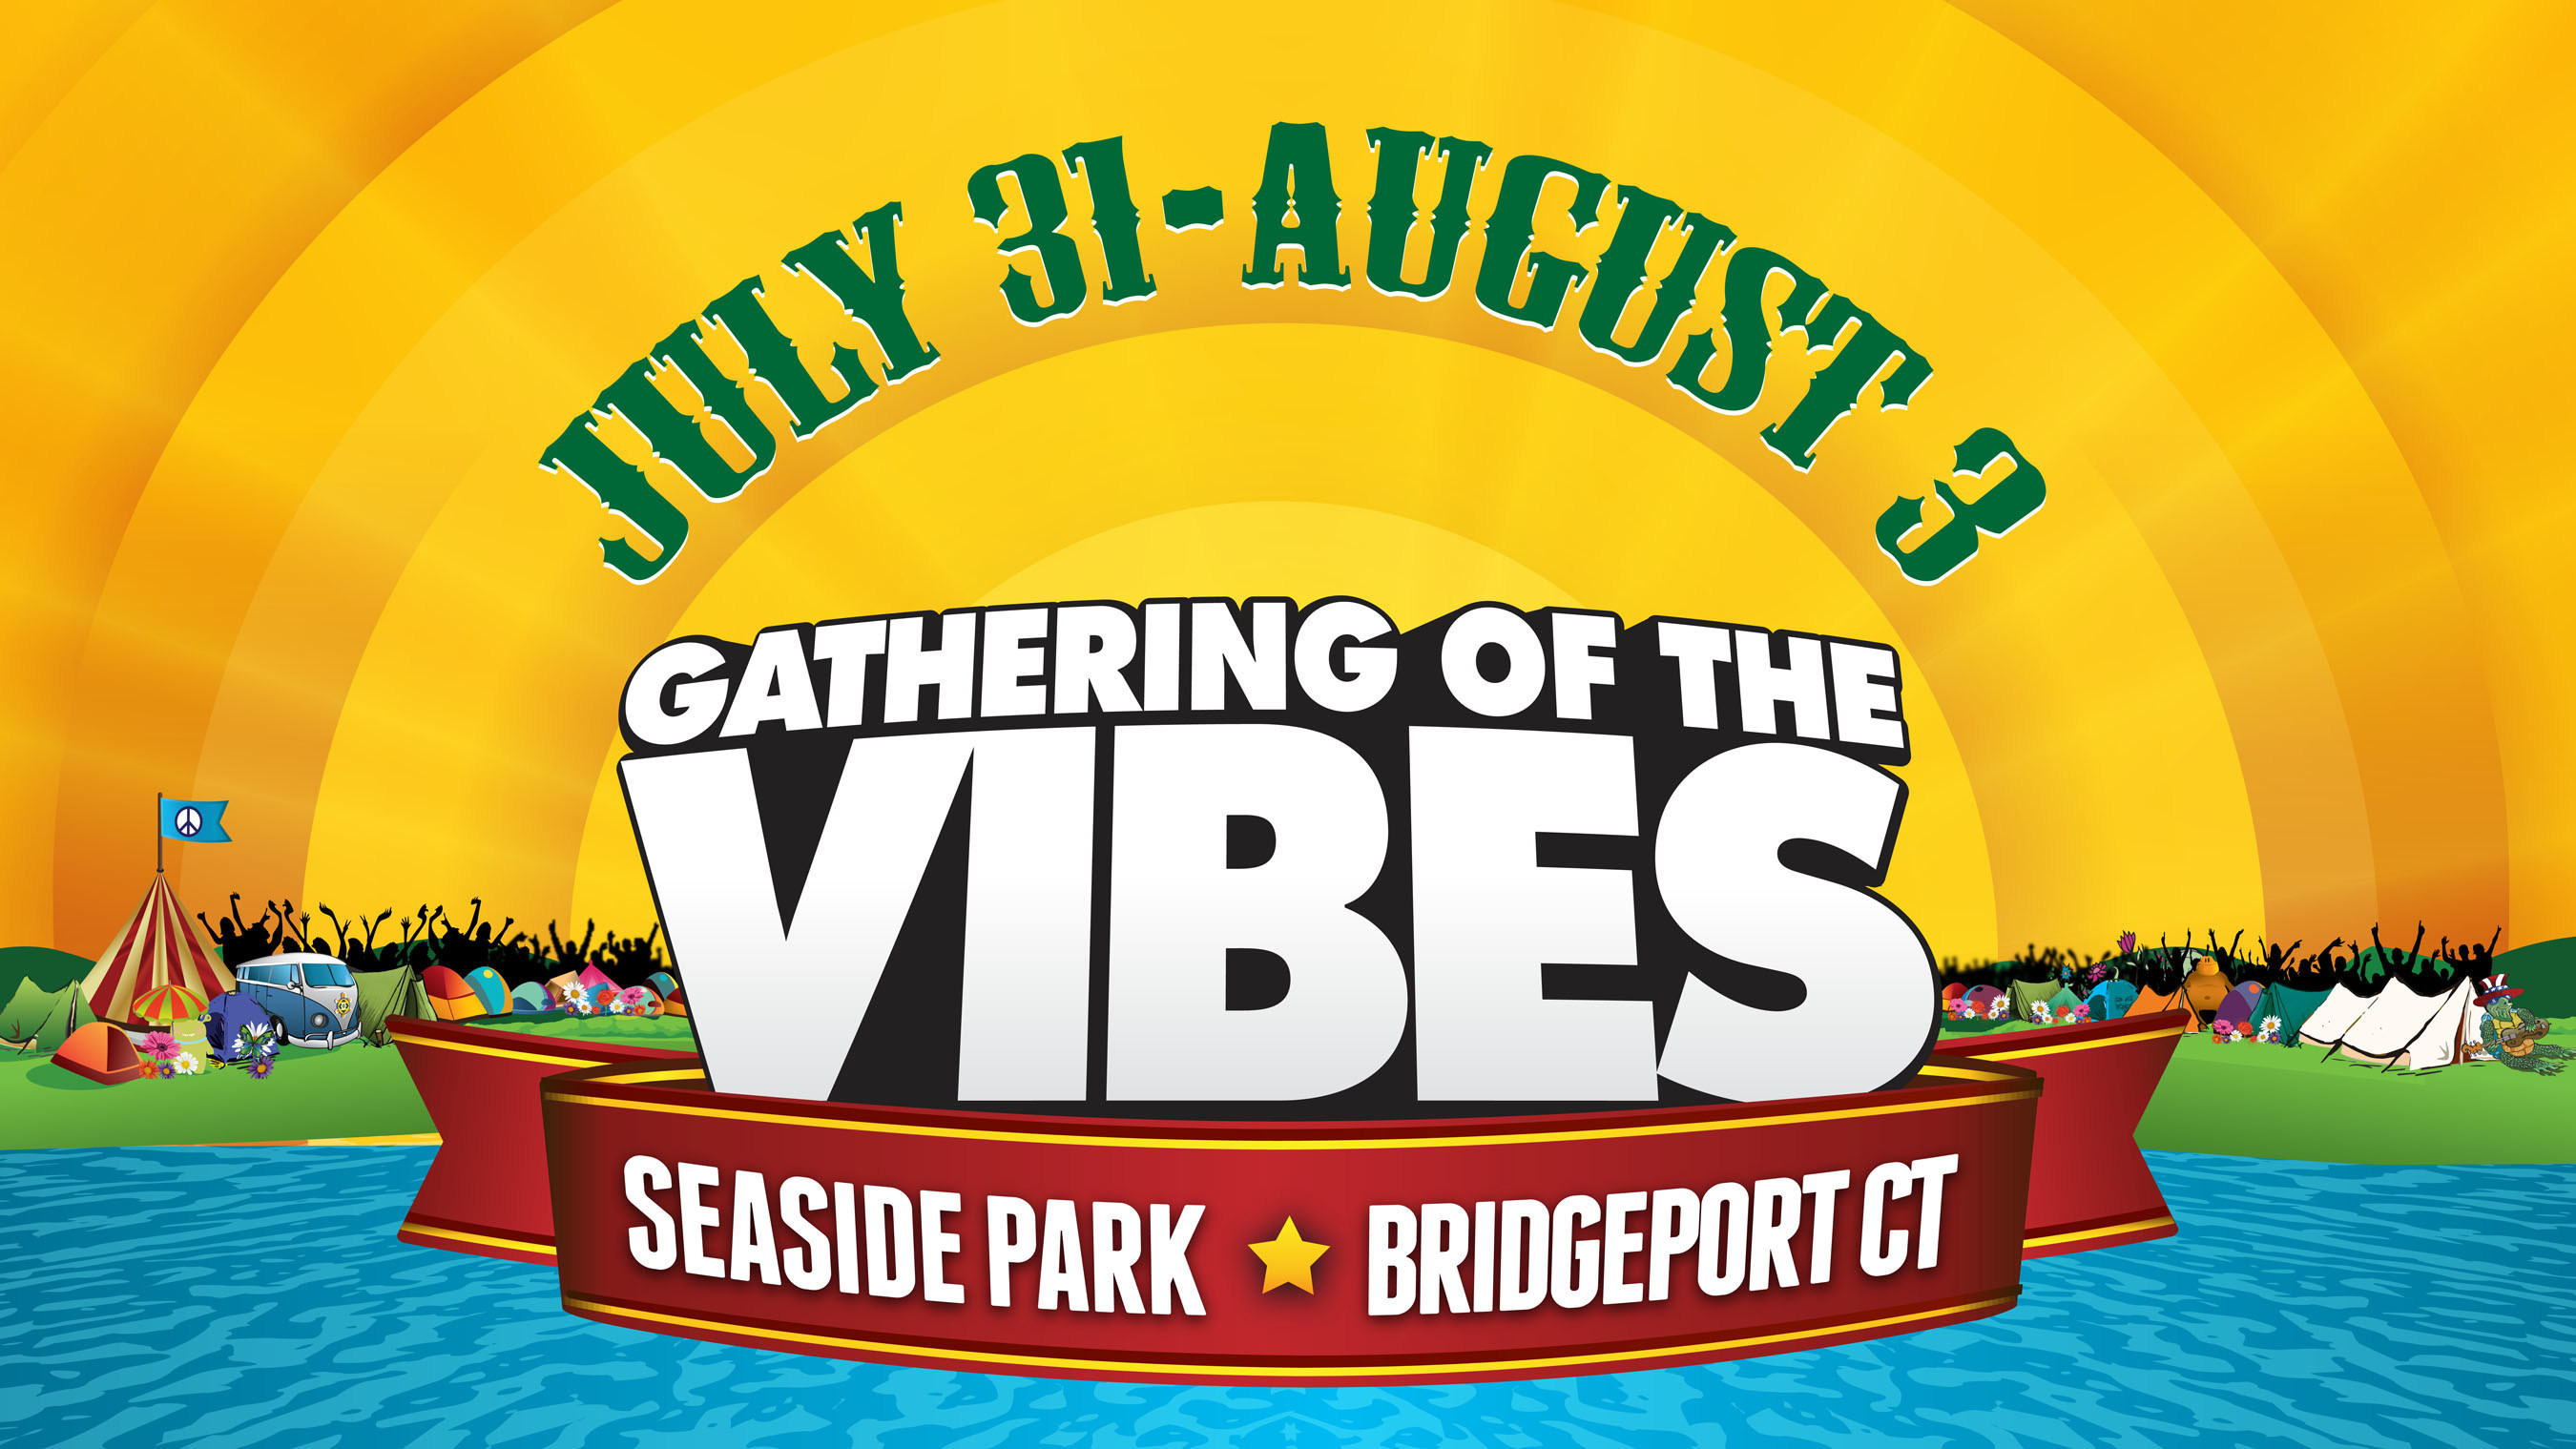 John Fogerty, Ziggy Marley and 40+ more are set to rock @Gatheringofthevibes Music Festival 7/31-8/3 in Connecticut. More info & tickets www.govibes.com, #GoVibes #VibeTribe. (PRNewsFoto/Gathering of the Vibes)